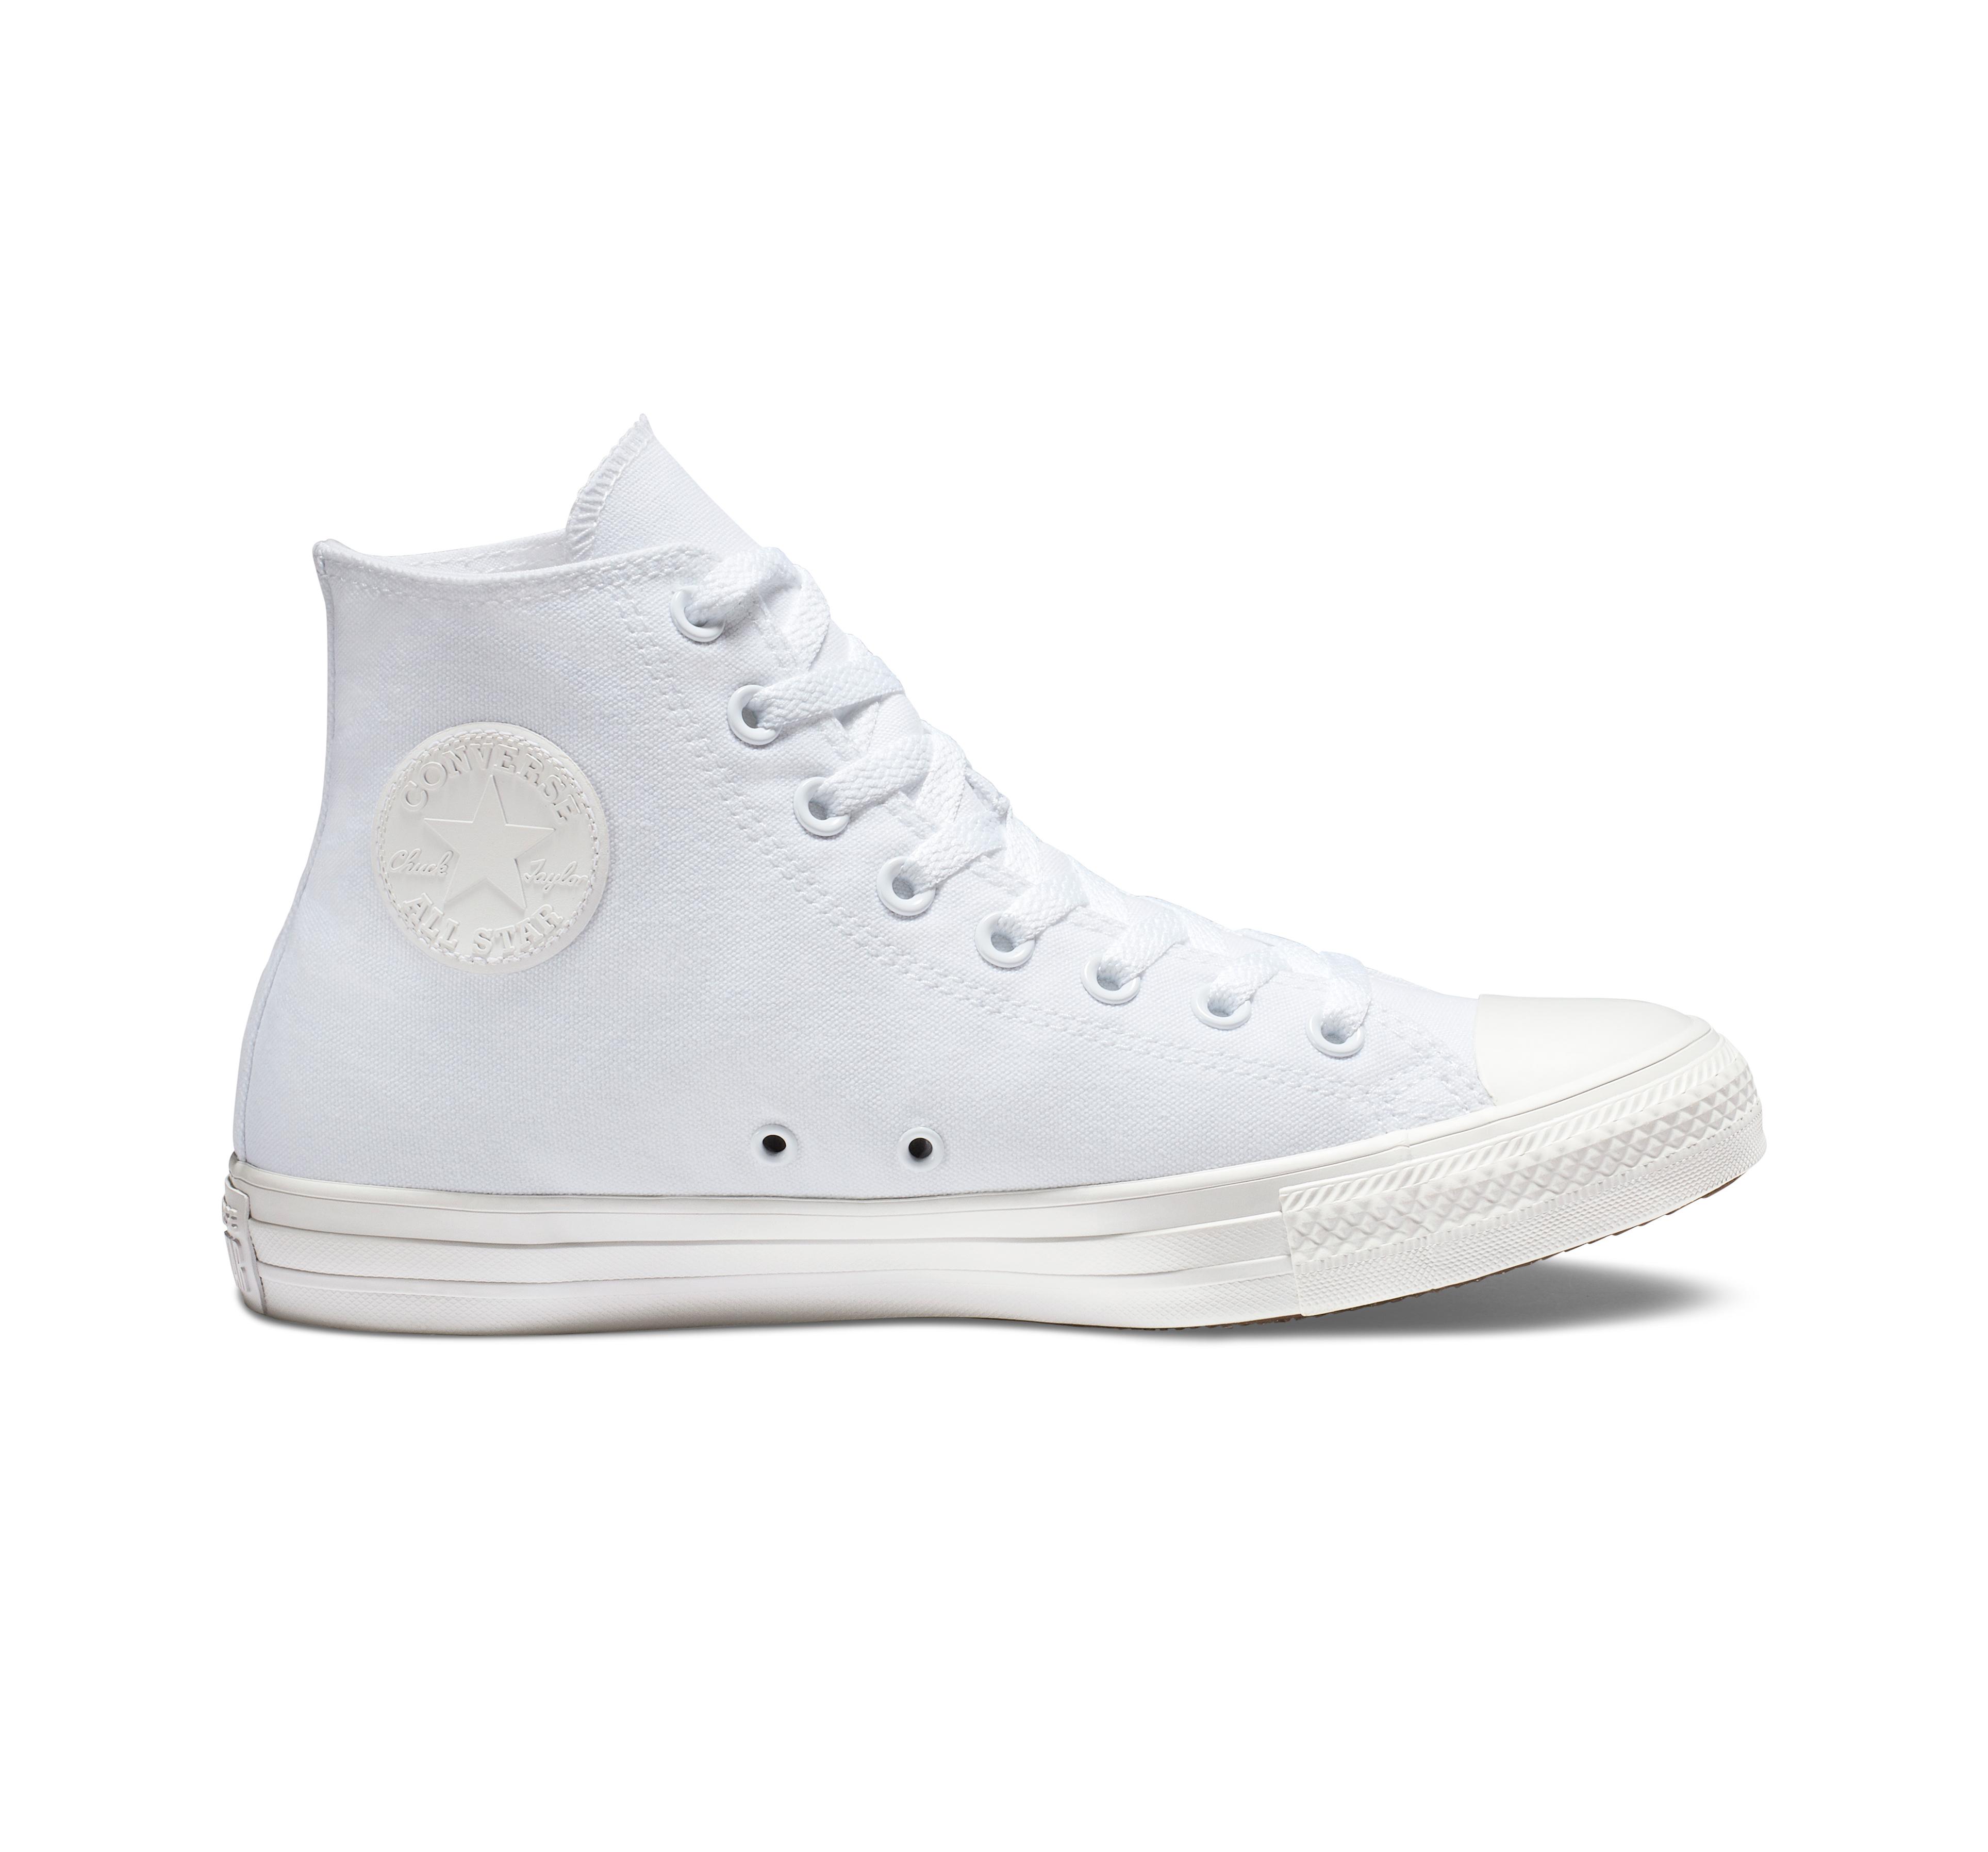 Converse Chuck Taylor All Star High Top in White - Lyst